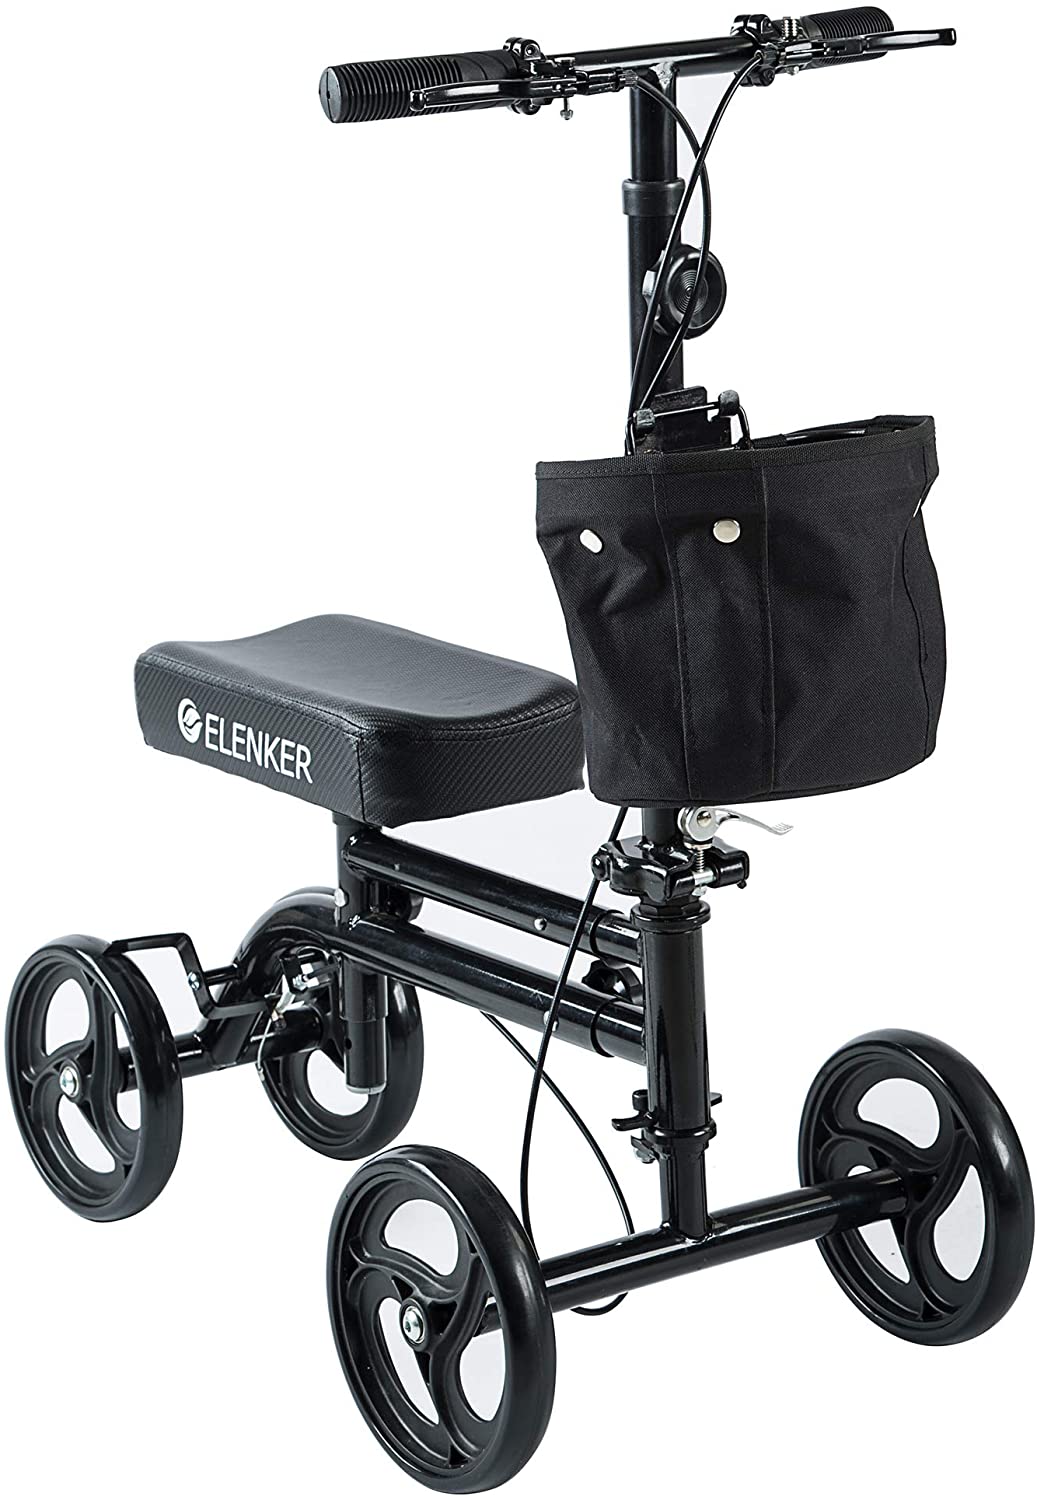 HW-8001 ELENKER?  ELENKER?  Knee Scooter Economy Knee Walker with Dual Braking System for Injury or Surgery to The Foot Refurbished